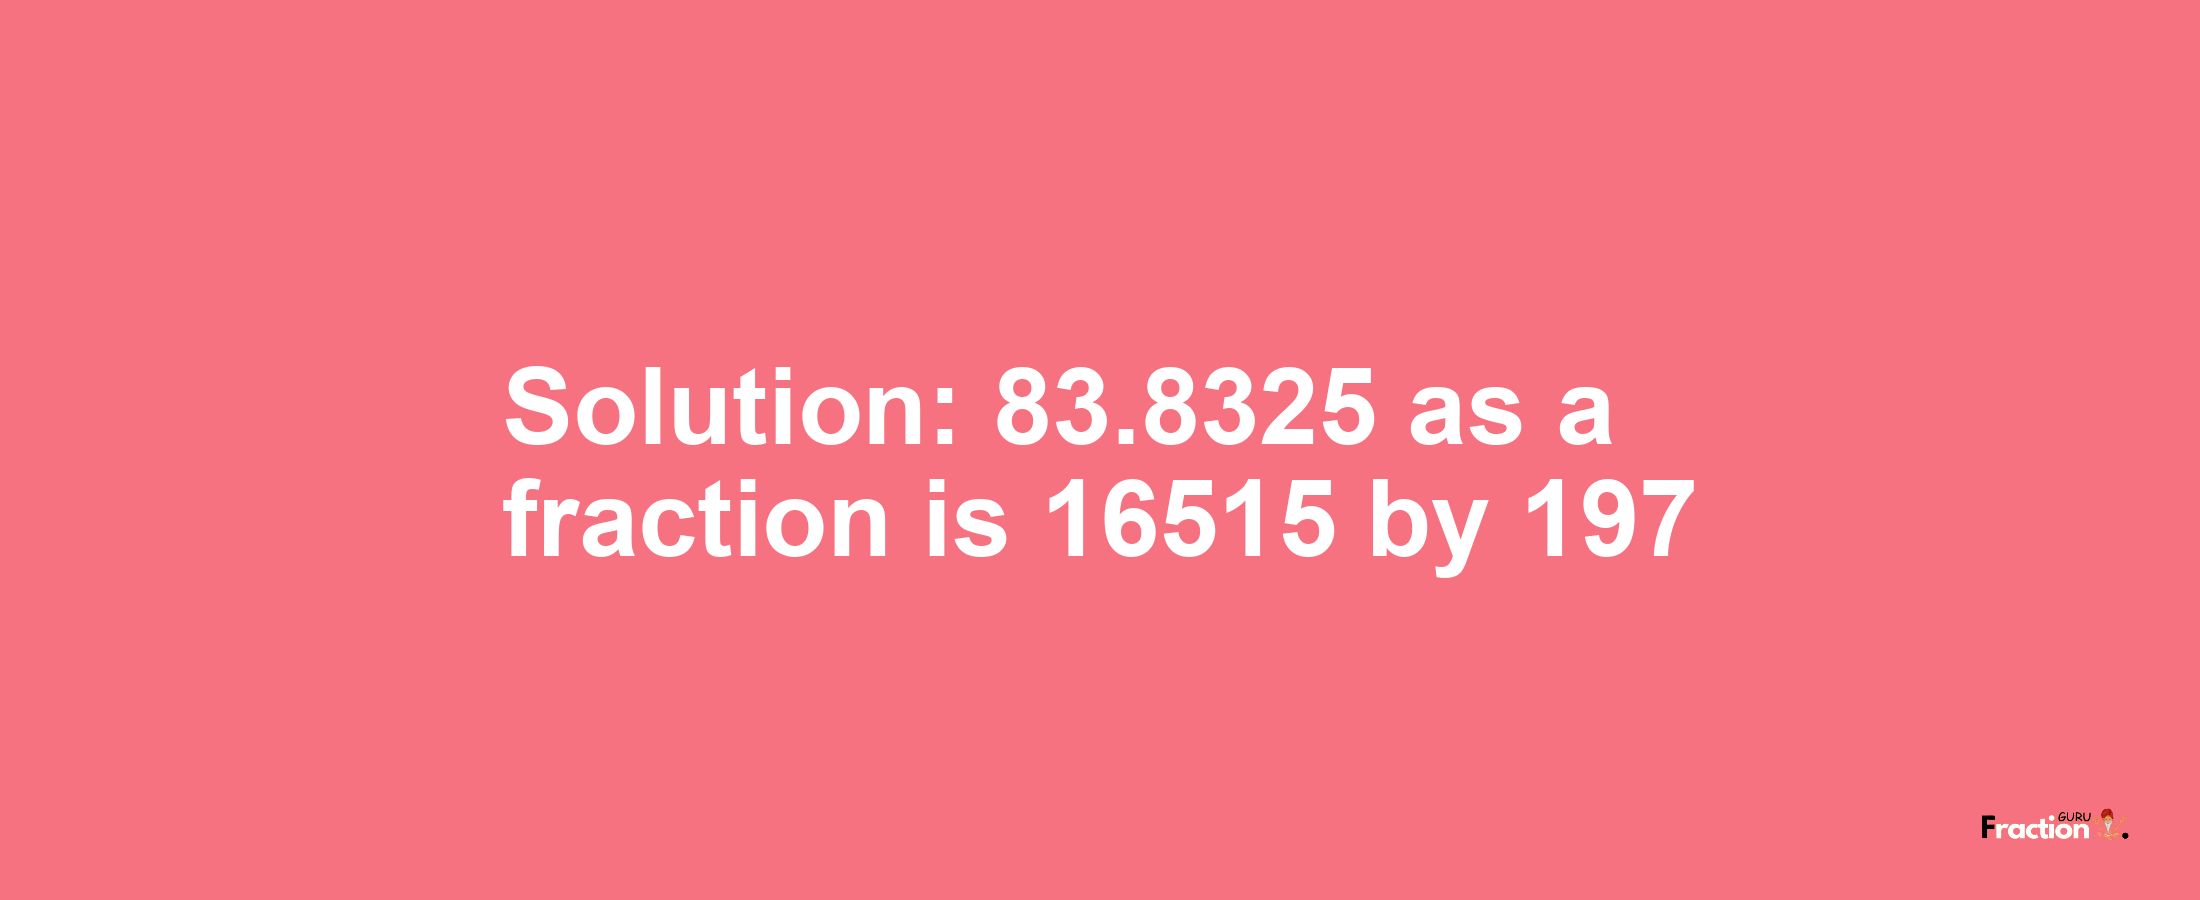 Solution:83.8325 as a fraction is 16515/197